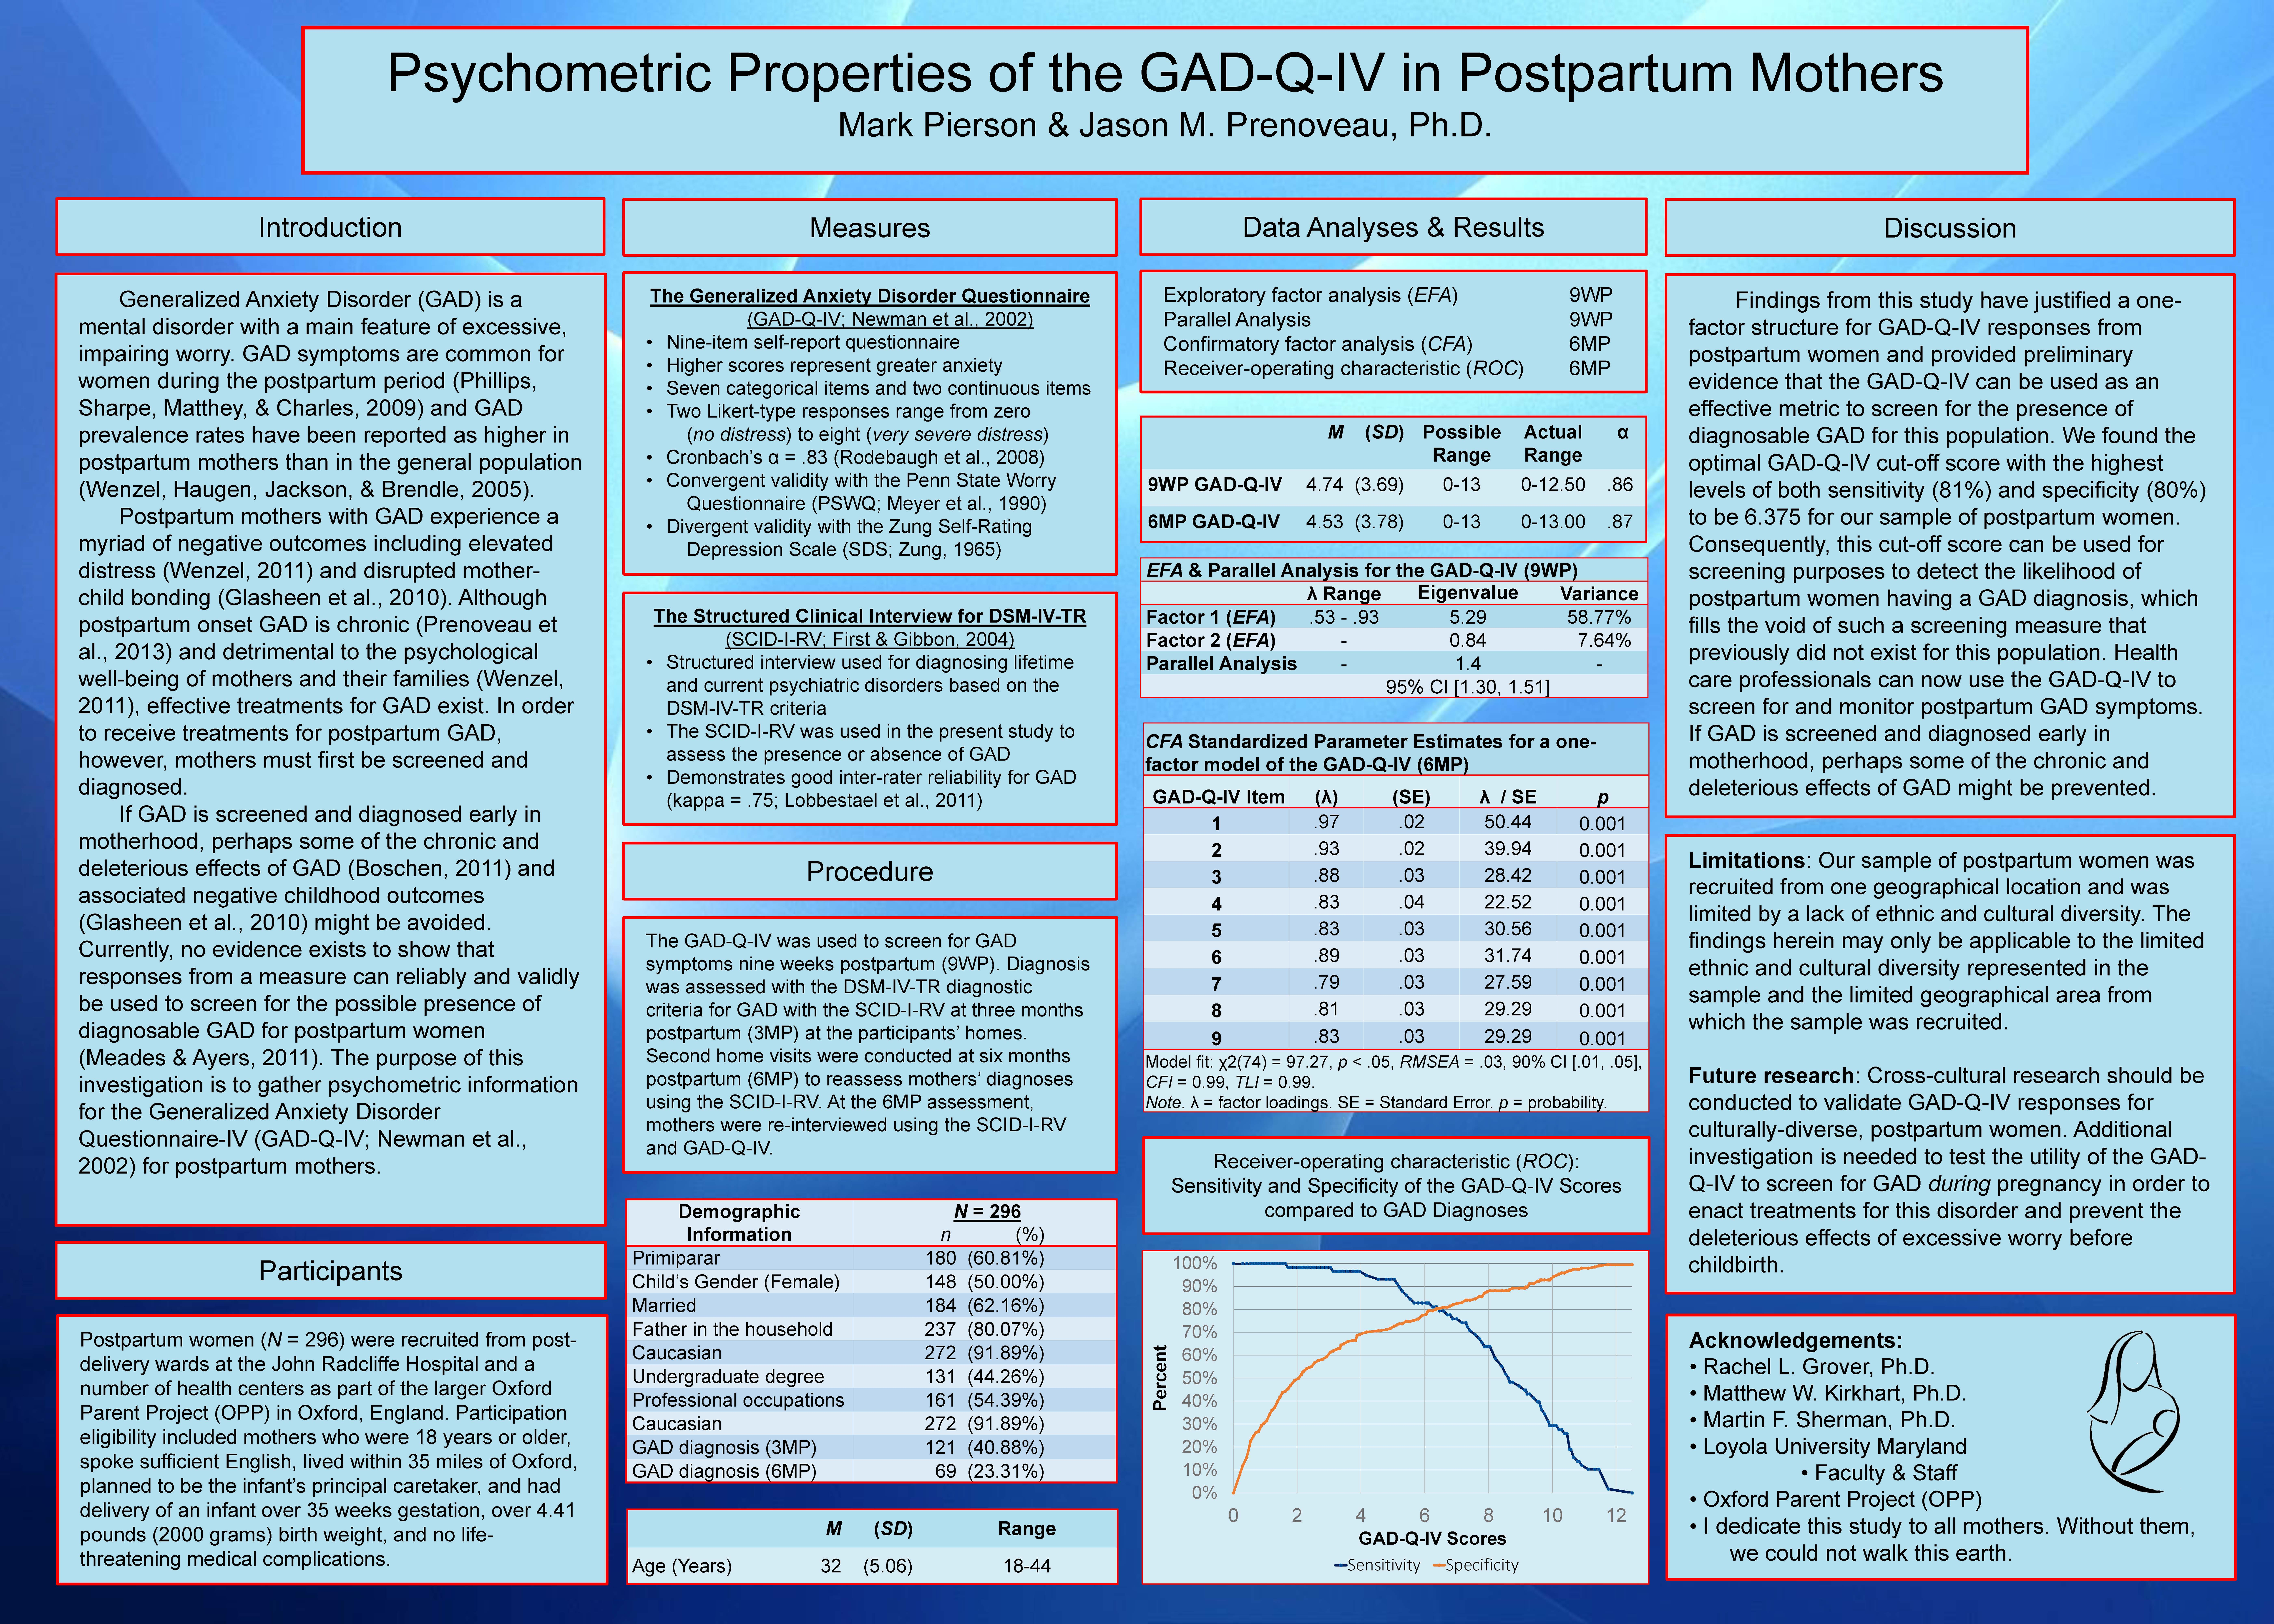 poster image: 'Psychometric Properties of the GAD-Q-IV in Postpartum Mothers'